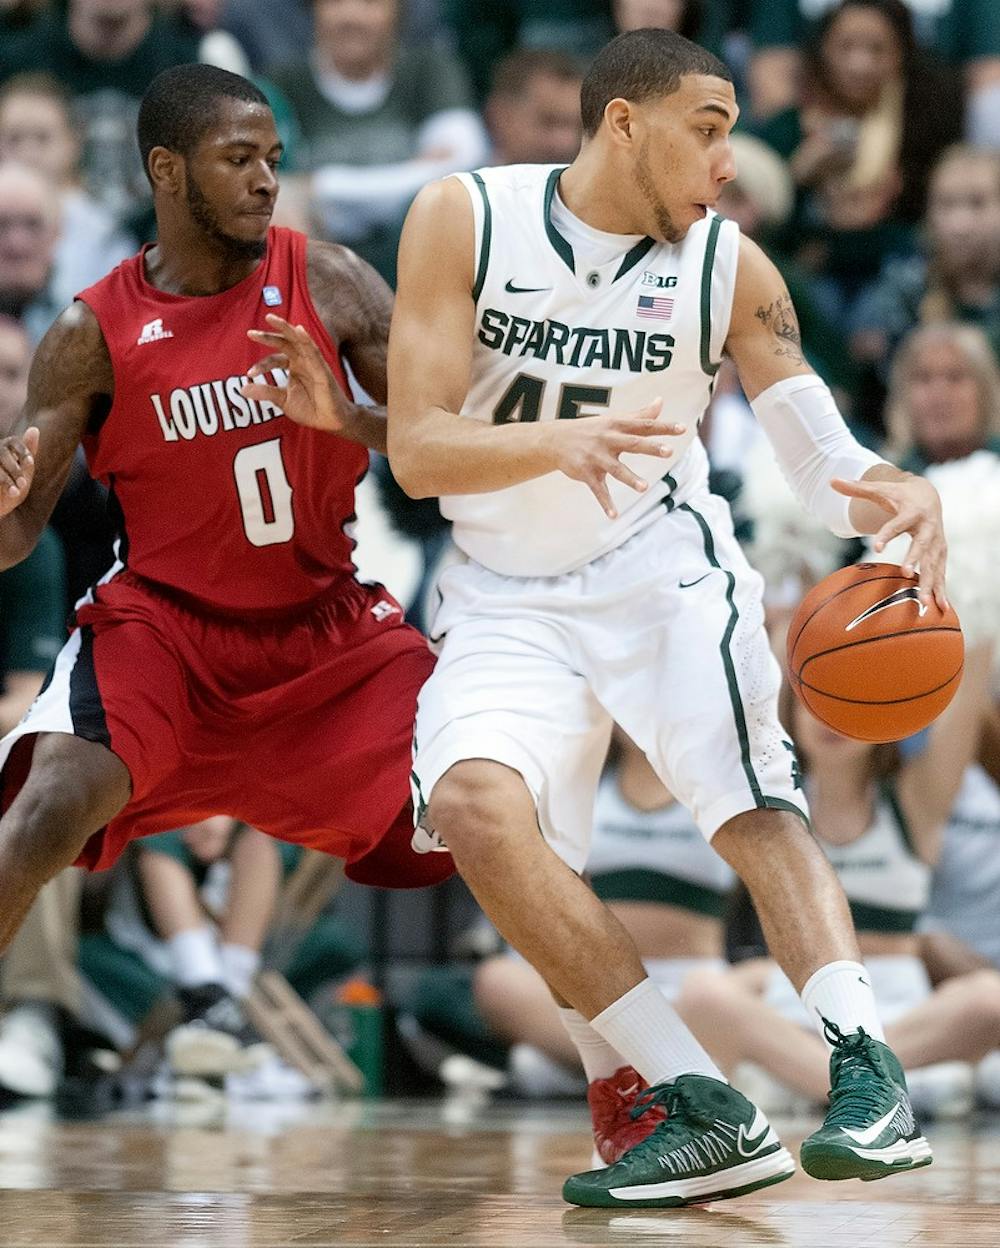 	<p>Freshman guard Denzel Valentine dribbles the ball during the game against Louisiana-Lafayette on Nov. 25, 2012, at Breslin Center. The Spartans beat the Ragin&#8217; Cajuns 60-63. Natalie Kolb/The State News</p>